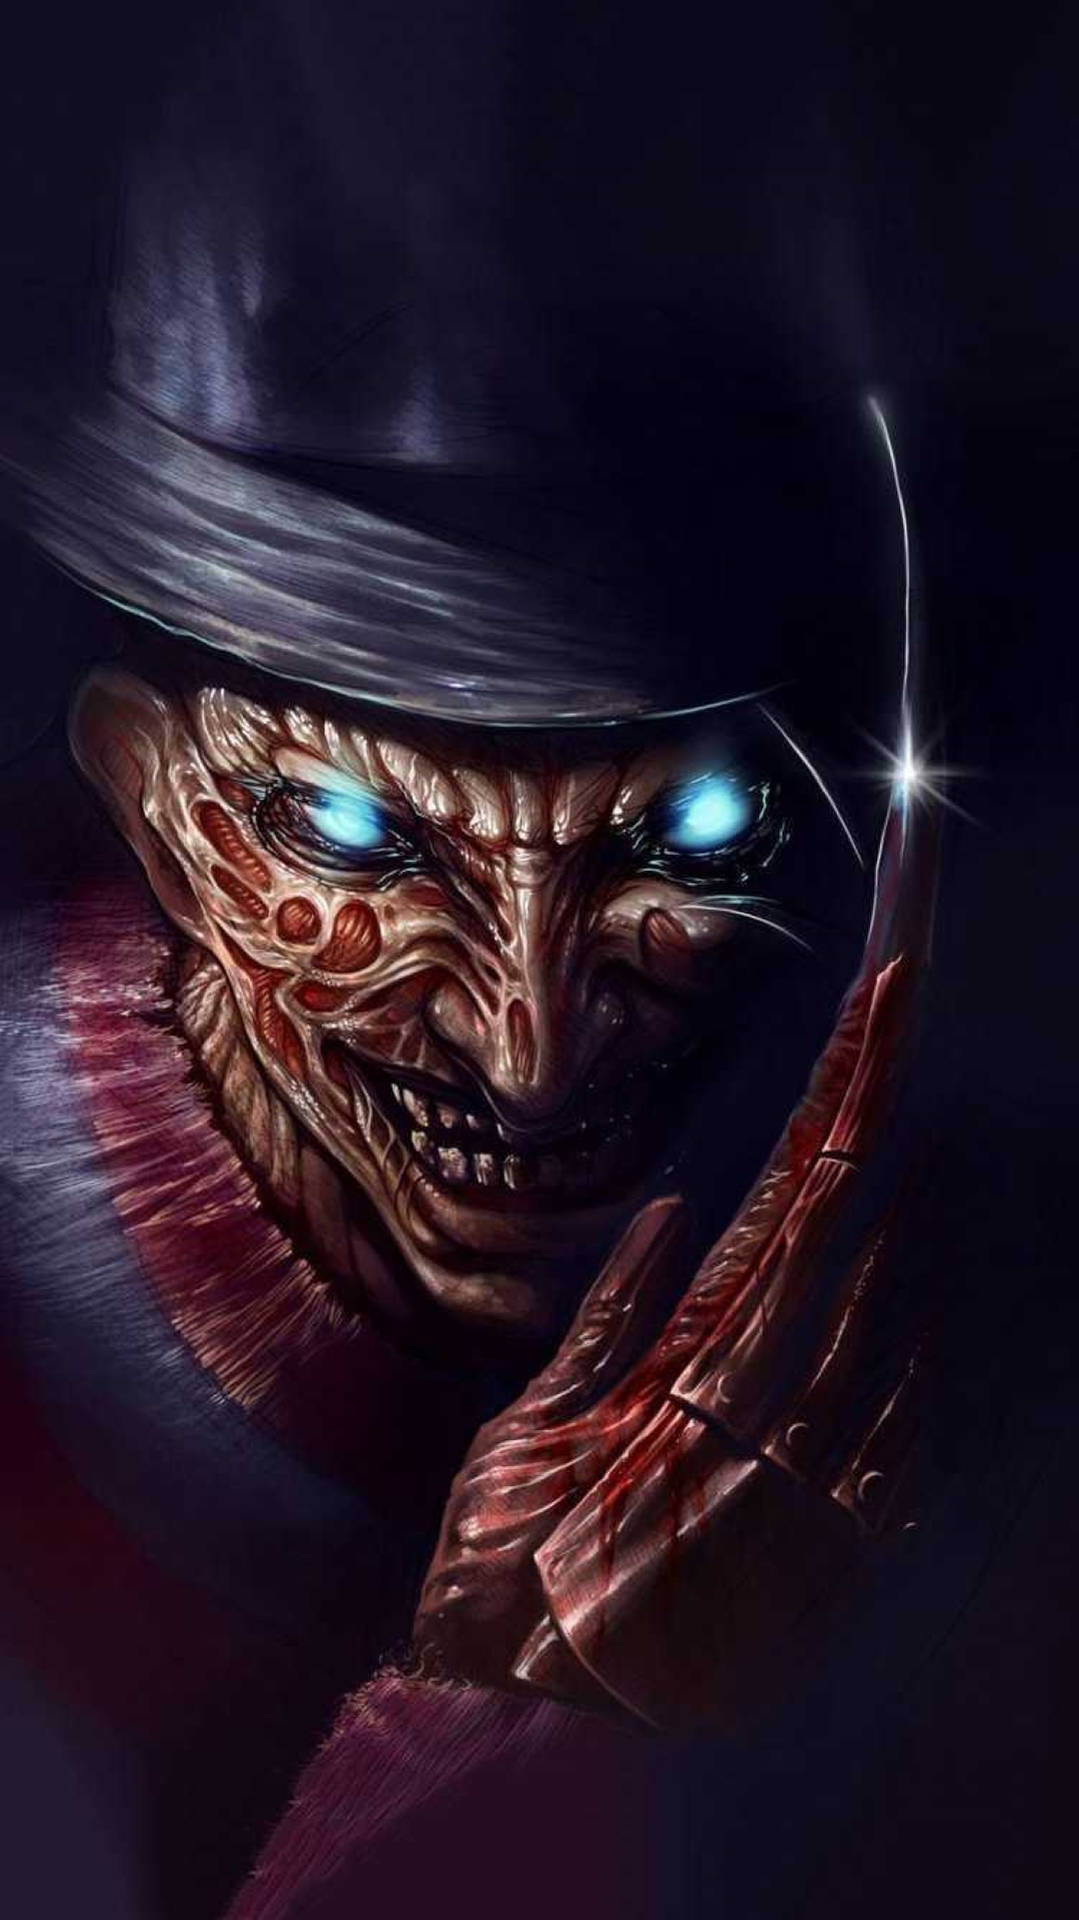 Download Freddy Krueger wallpapers for mobile phone free Freddy Krueger  HD pictures